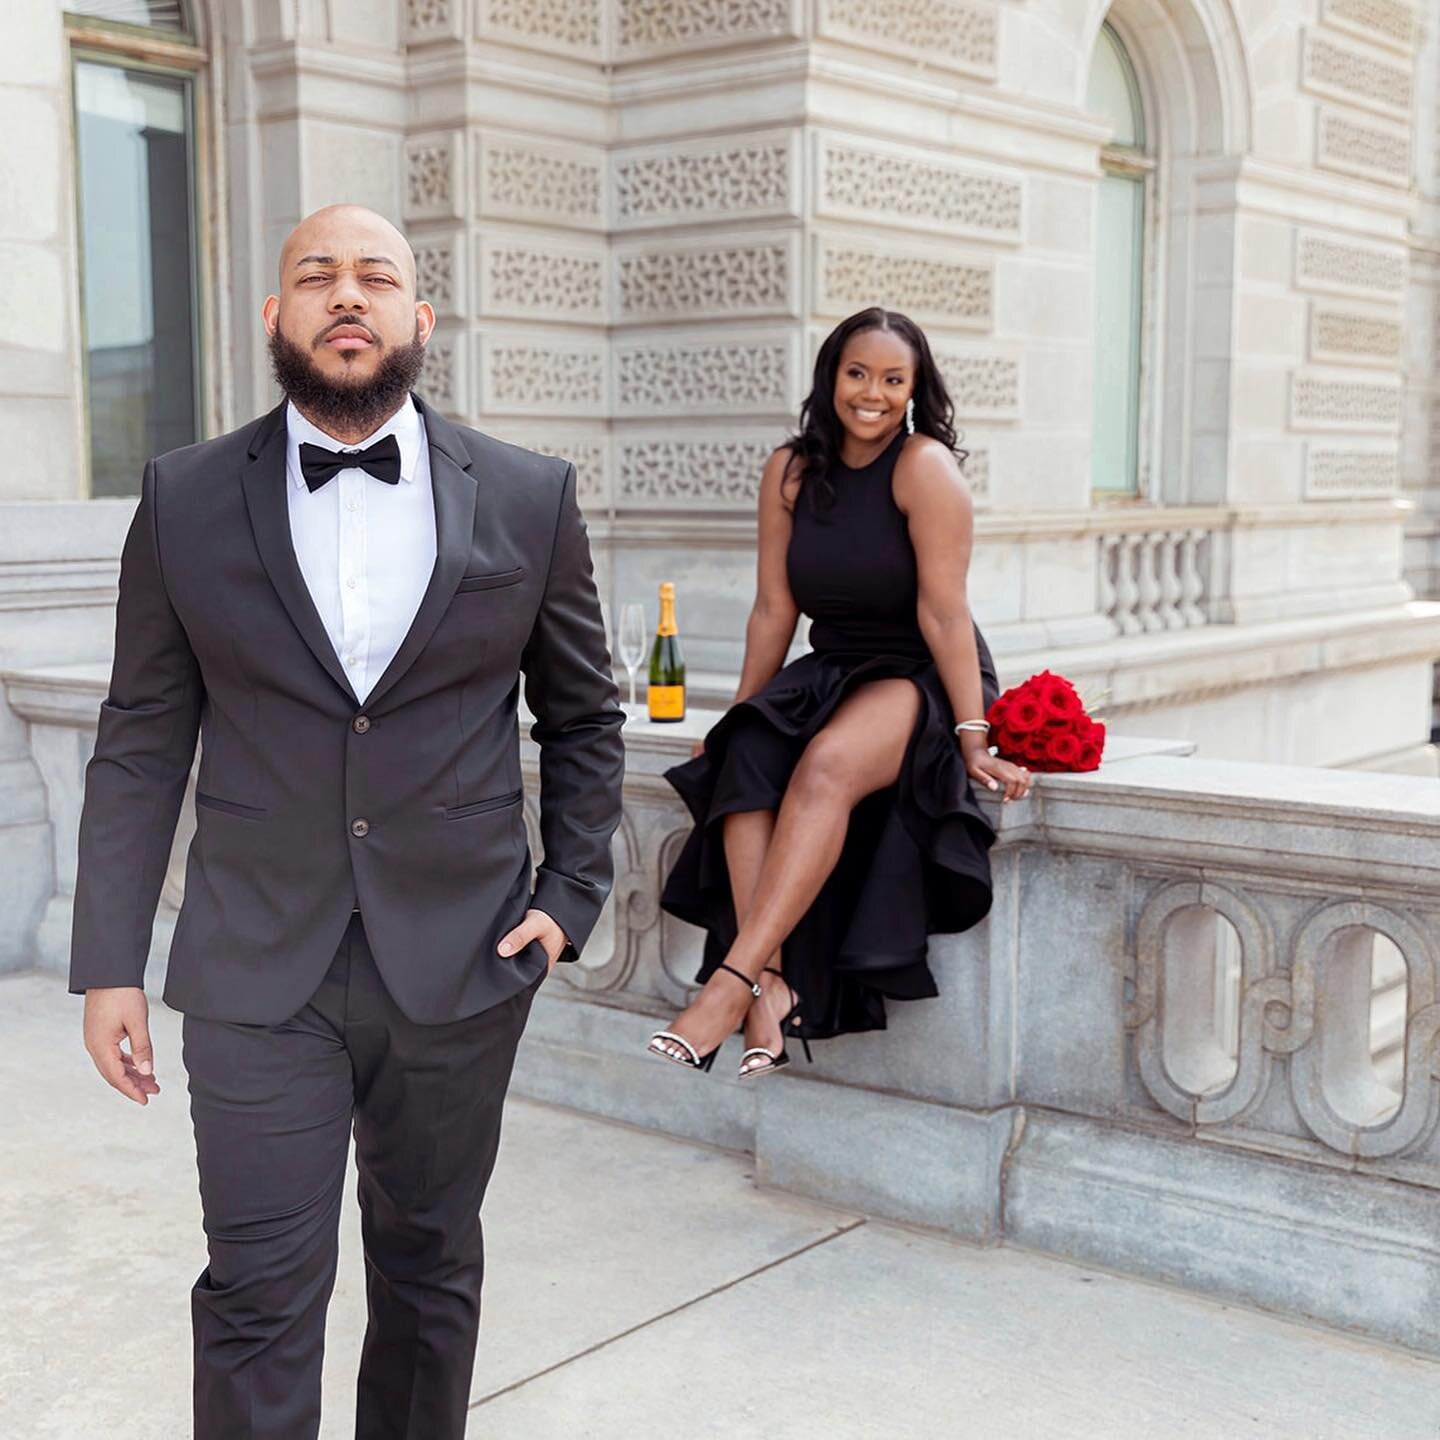 Preview of Chris &amp; Simone&rsquo;s classy engagement portraits! 🔥🔥🔥 Such a gorgeous couple with great vibes.⁣
⁣
MUA: @makeupby_pnang